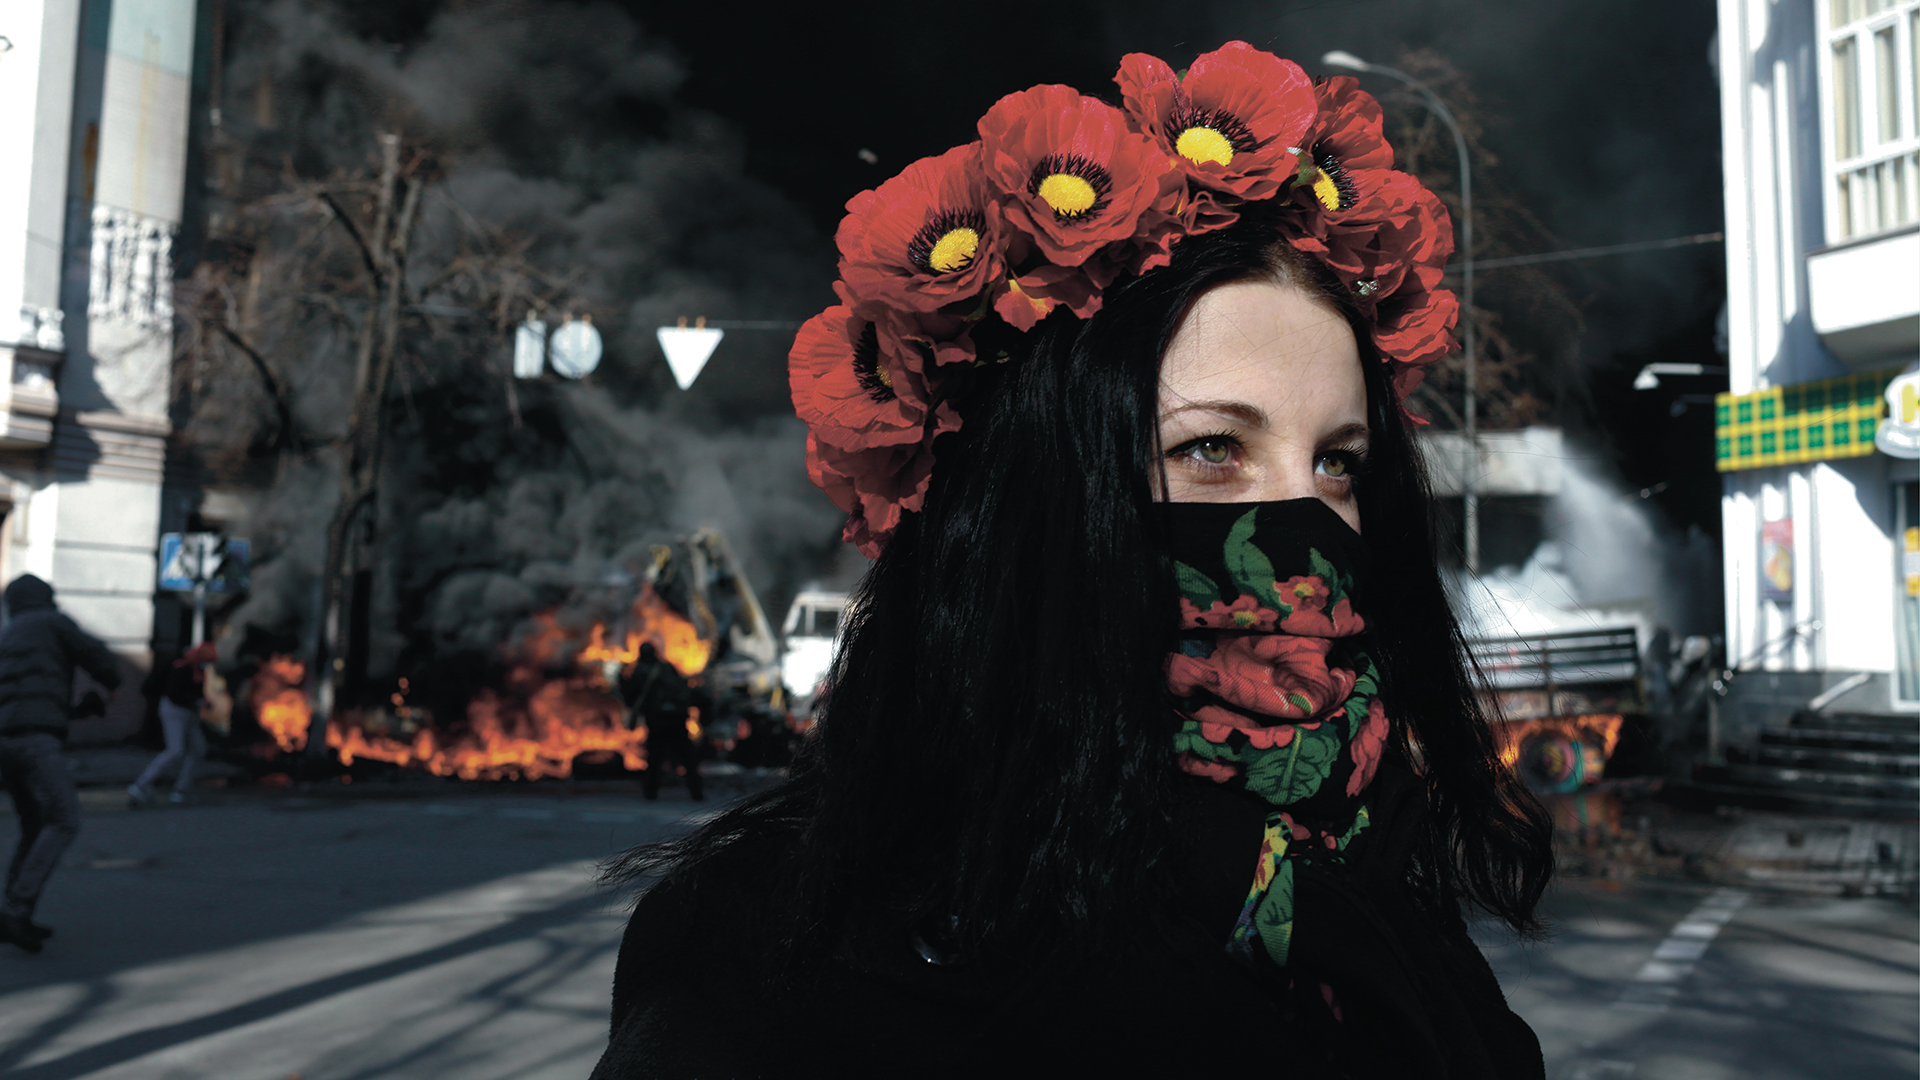 Young woman with wreath of flowers standing on street. In the background burning cars and black smoke.